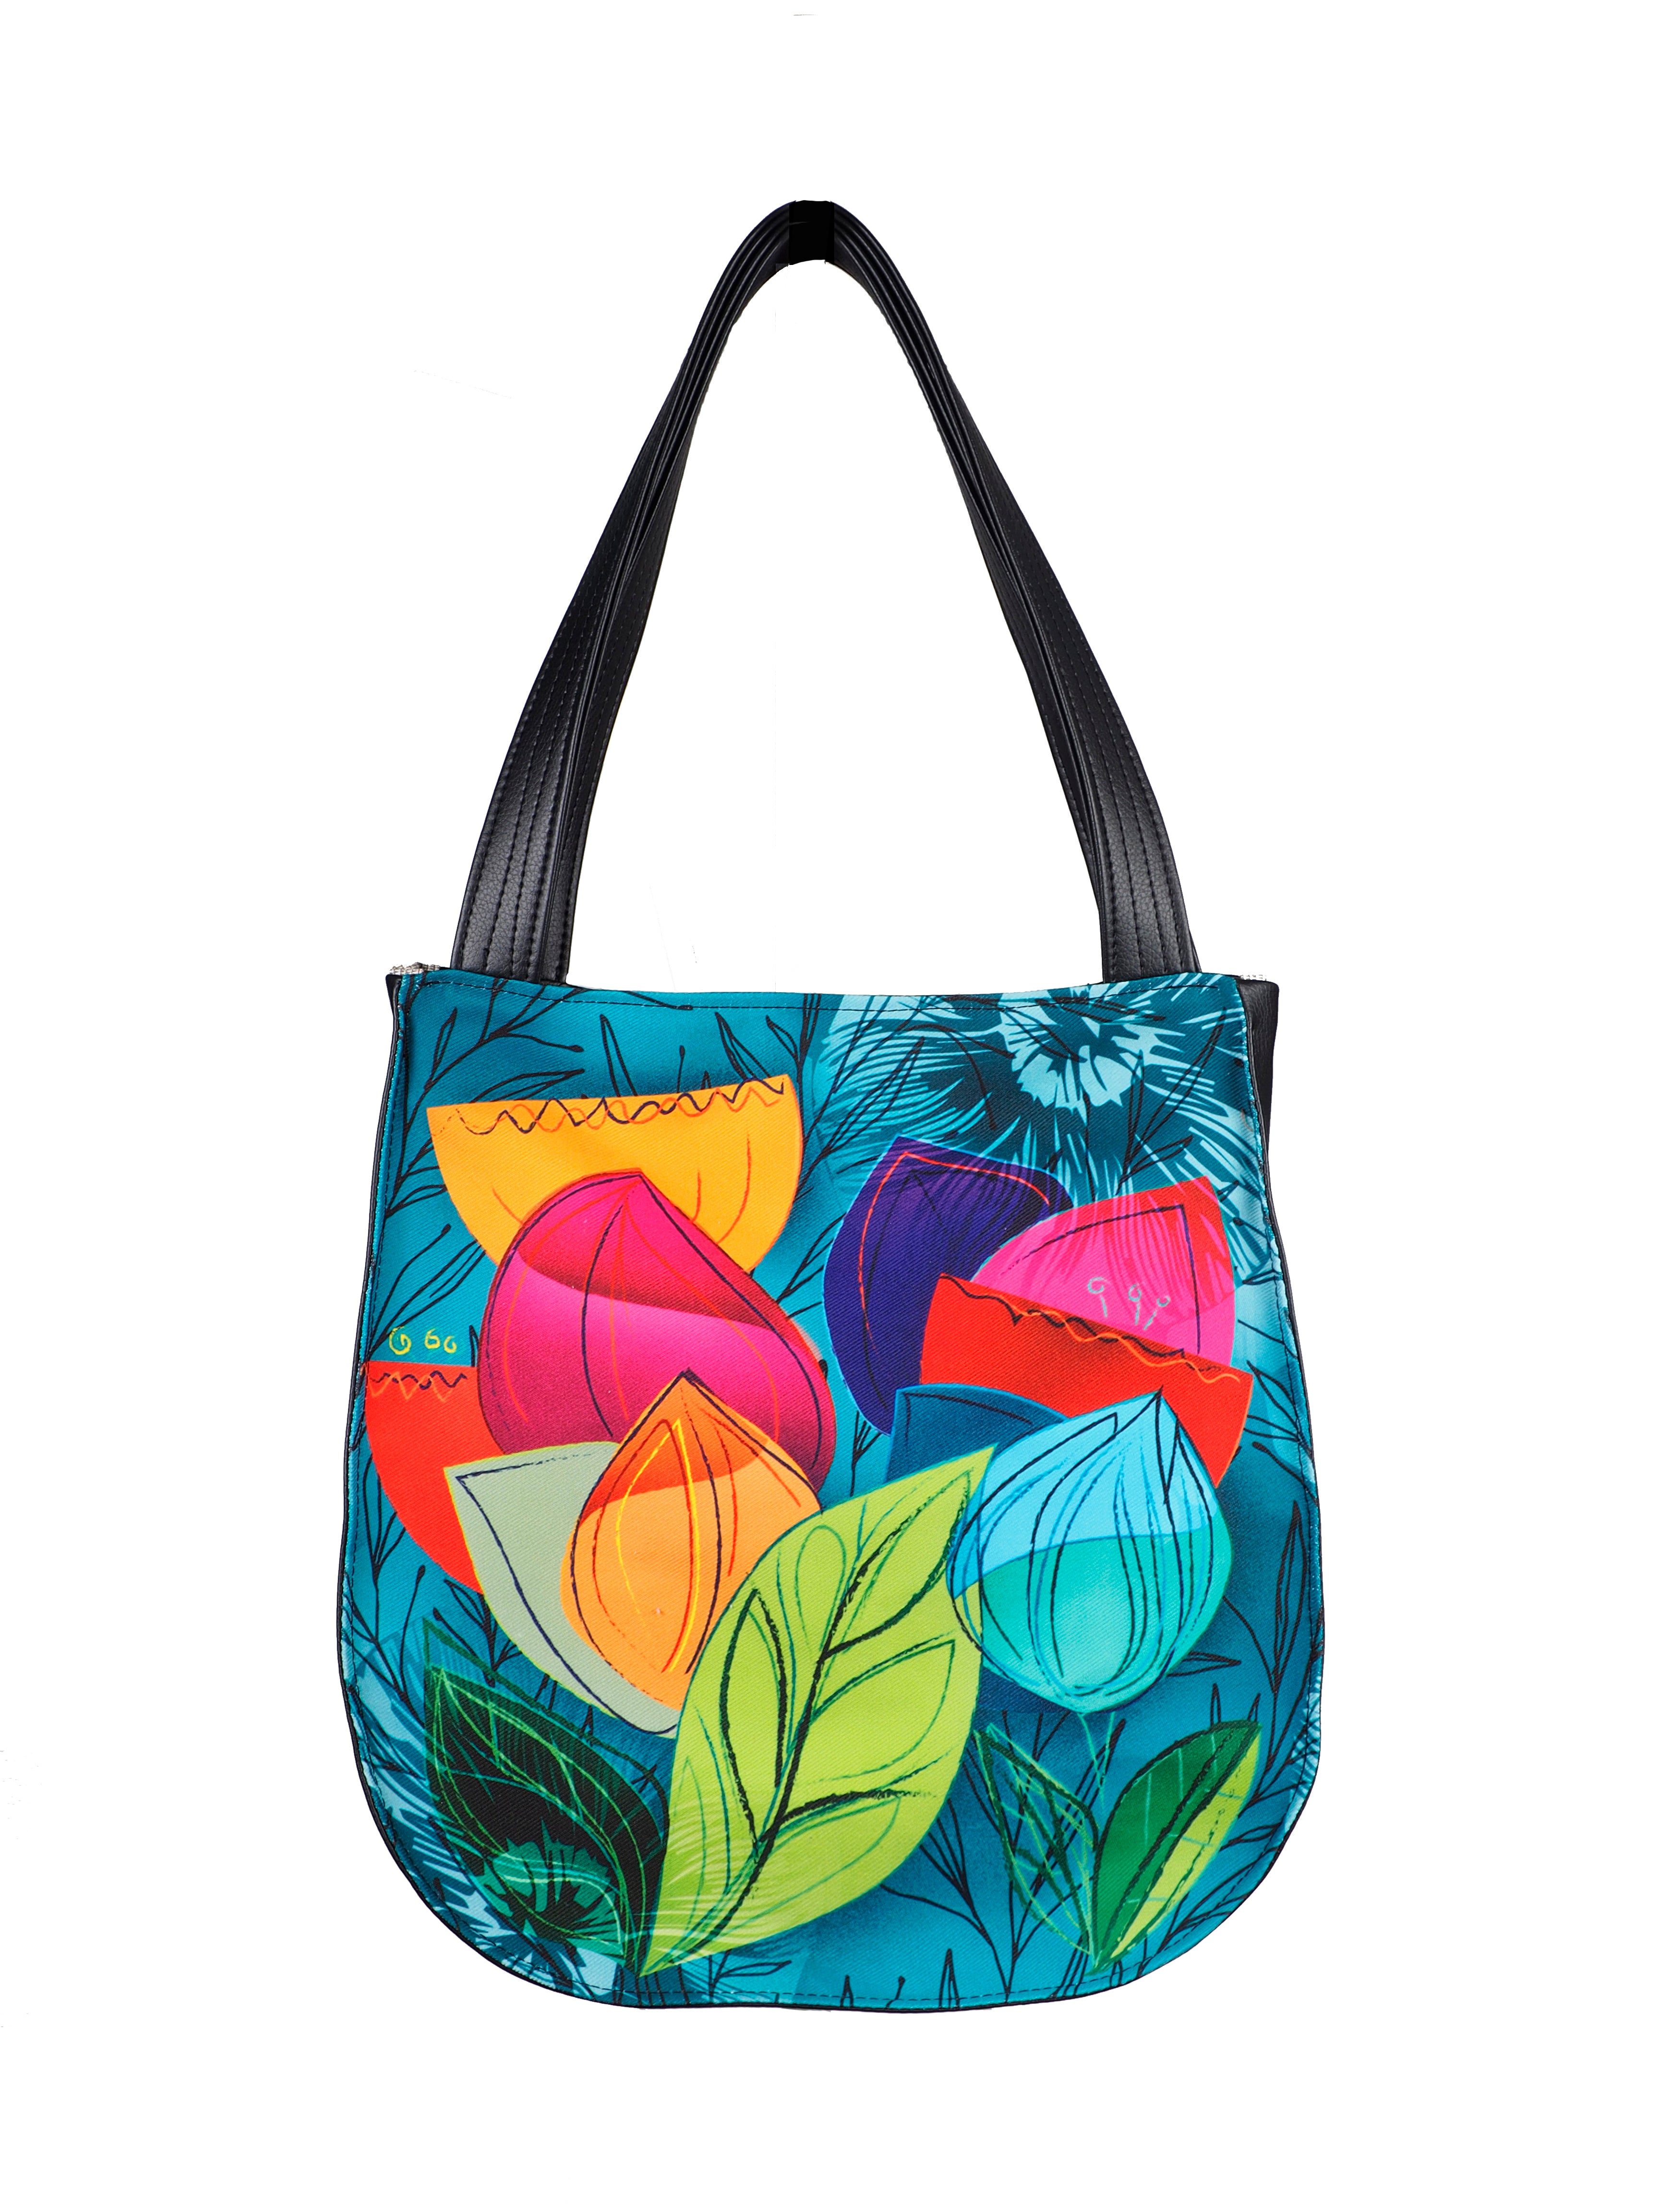 Bardo style bag - Forest flowers - Premium style bag from BARDO ART WORKS - Just lvbeige, dark blue, flowers, forest flowers, green, leaves, pink, red, summer, yellow69.00! Shop now at BARDO ART WORKS